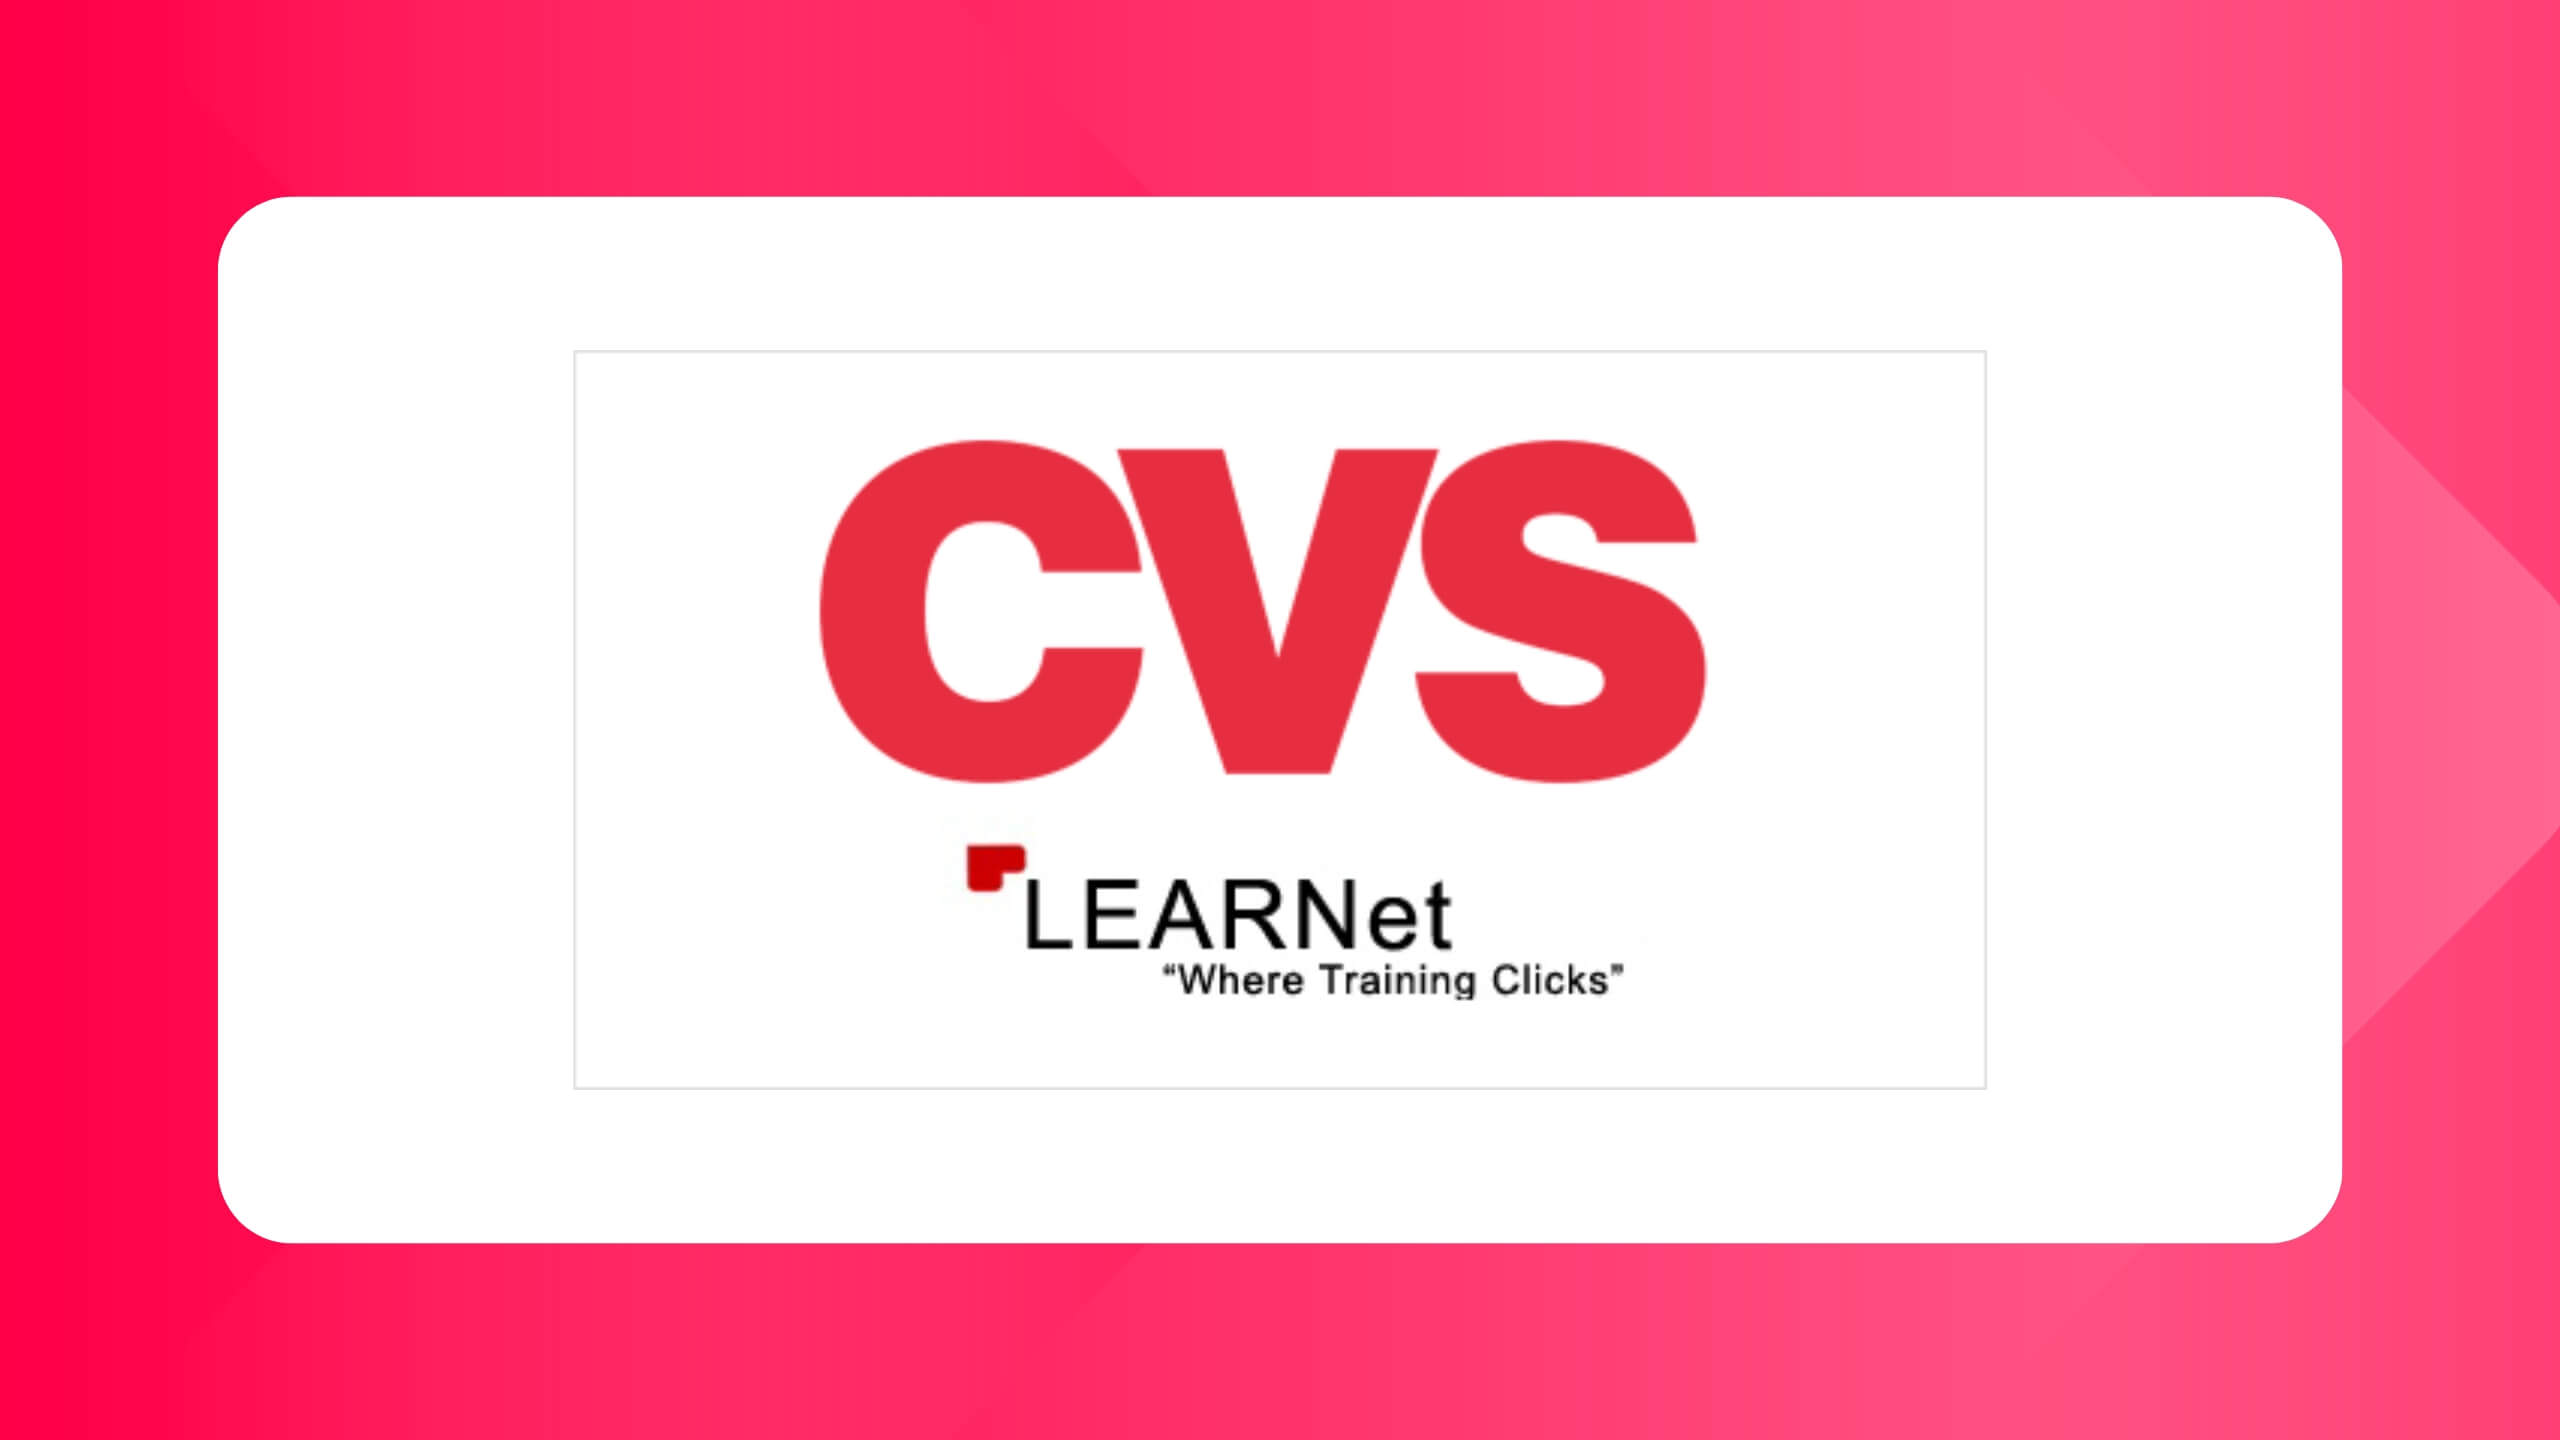 CVS Learnet Login is the Employee Login Portal for people who works at CVS Pharmacy and it's Child Branches